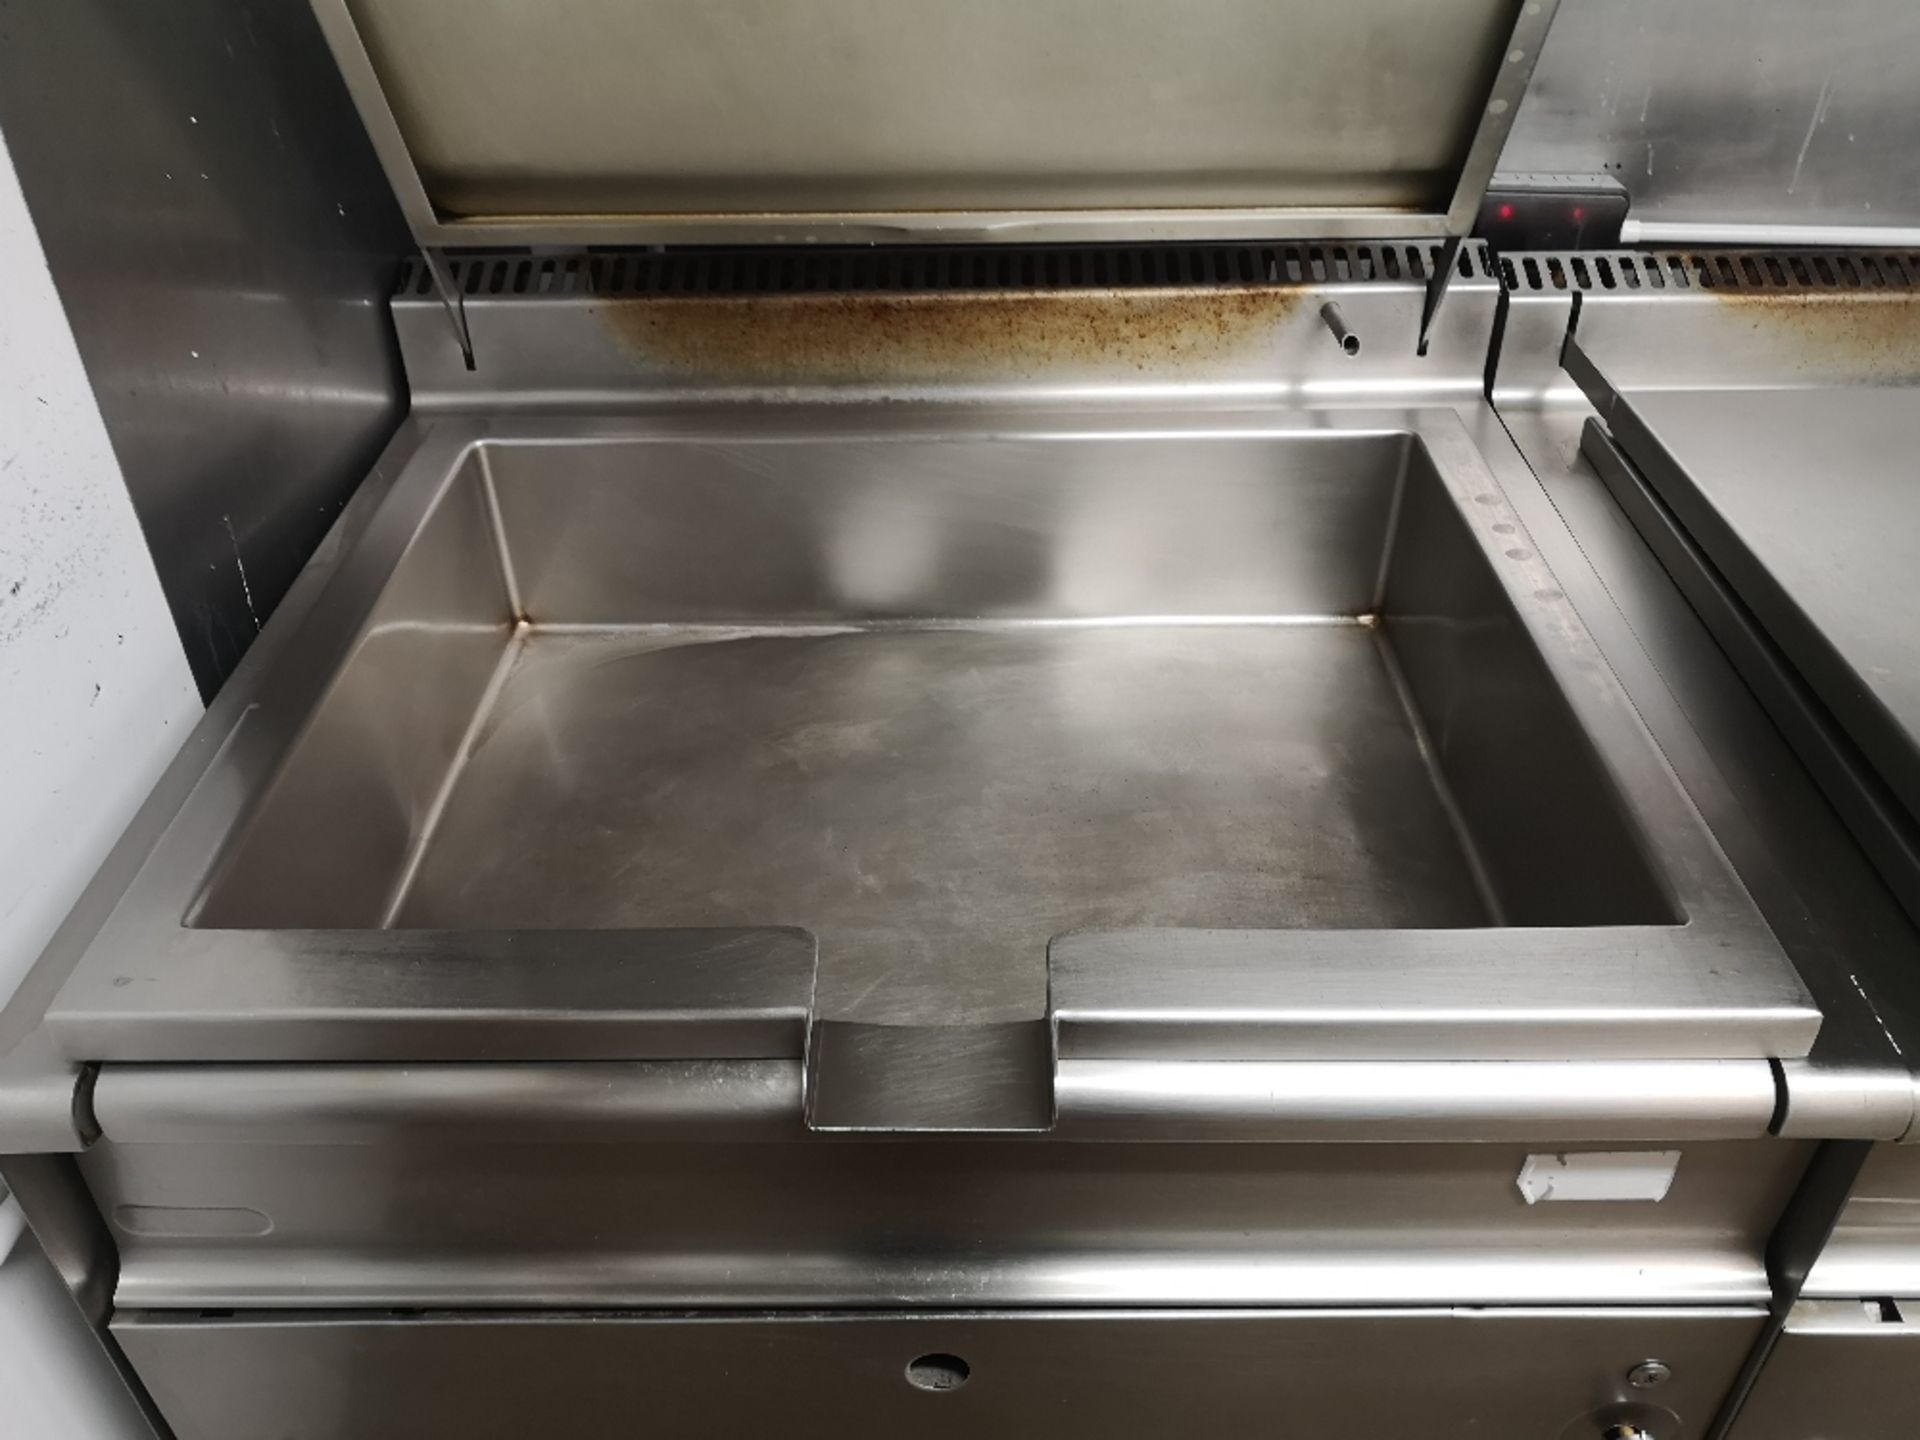 Stainless Steel 80Ltr Natural Gas Bratt Pan - Image 4 of 4